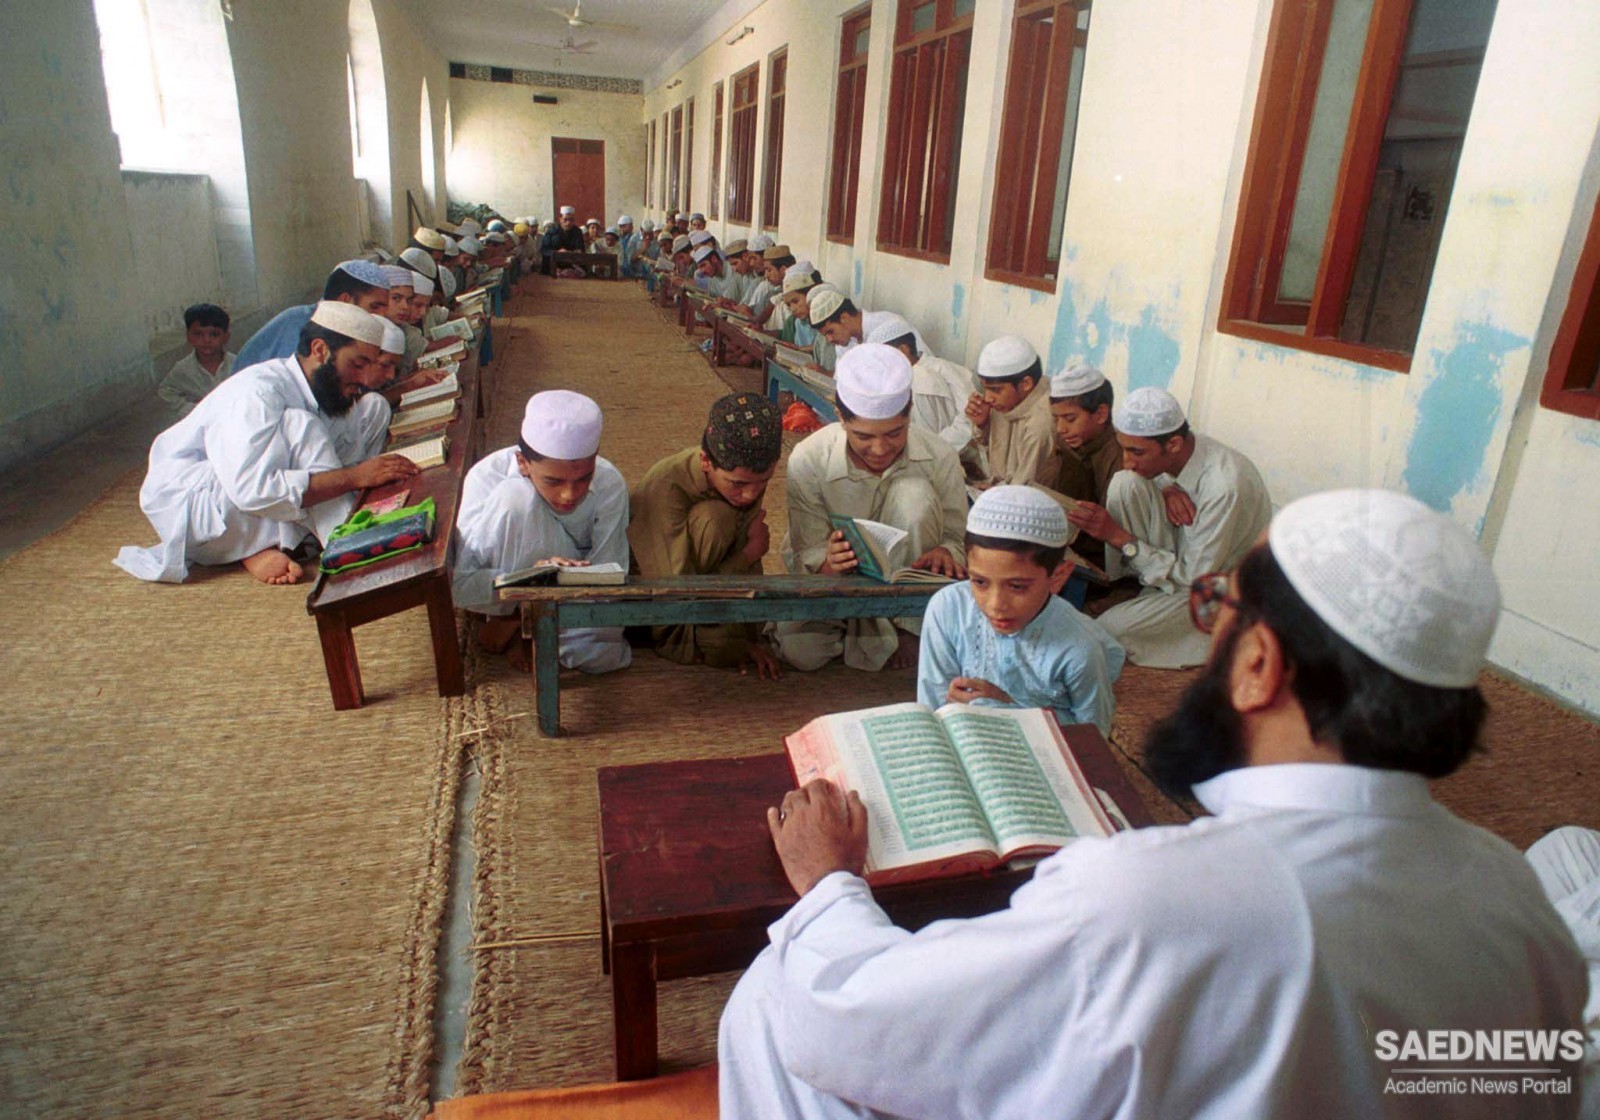 Islam on Education, Knowledge and Enlightenment